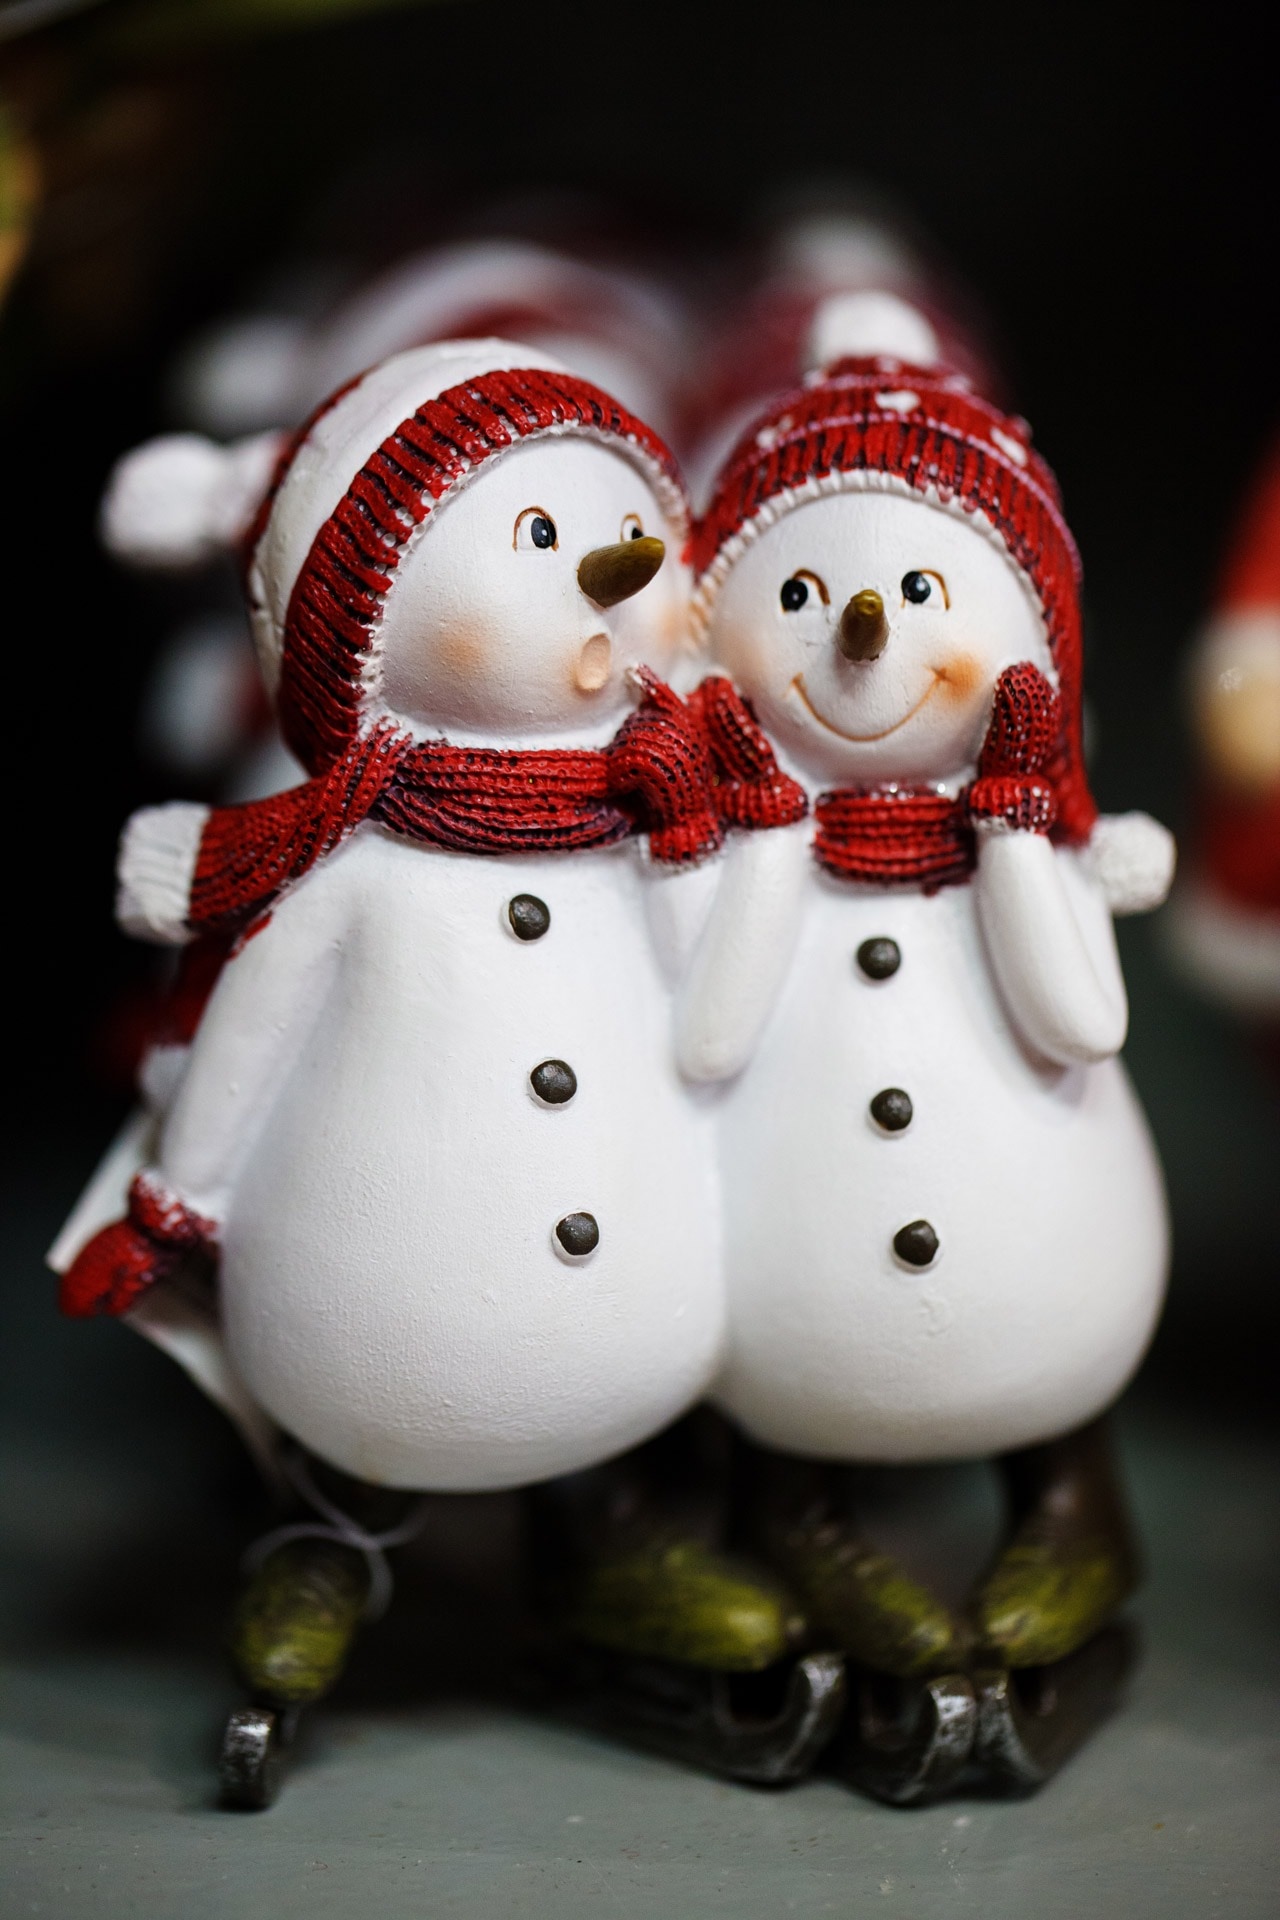 two snowman ceramic figurine on gray surface